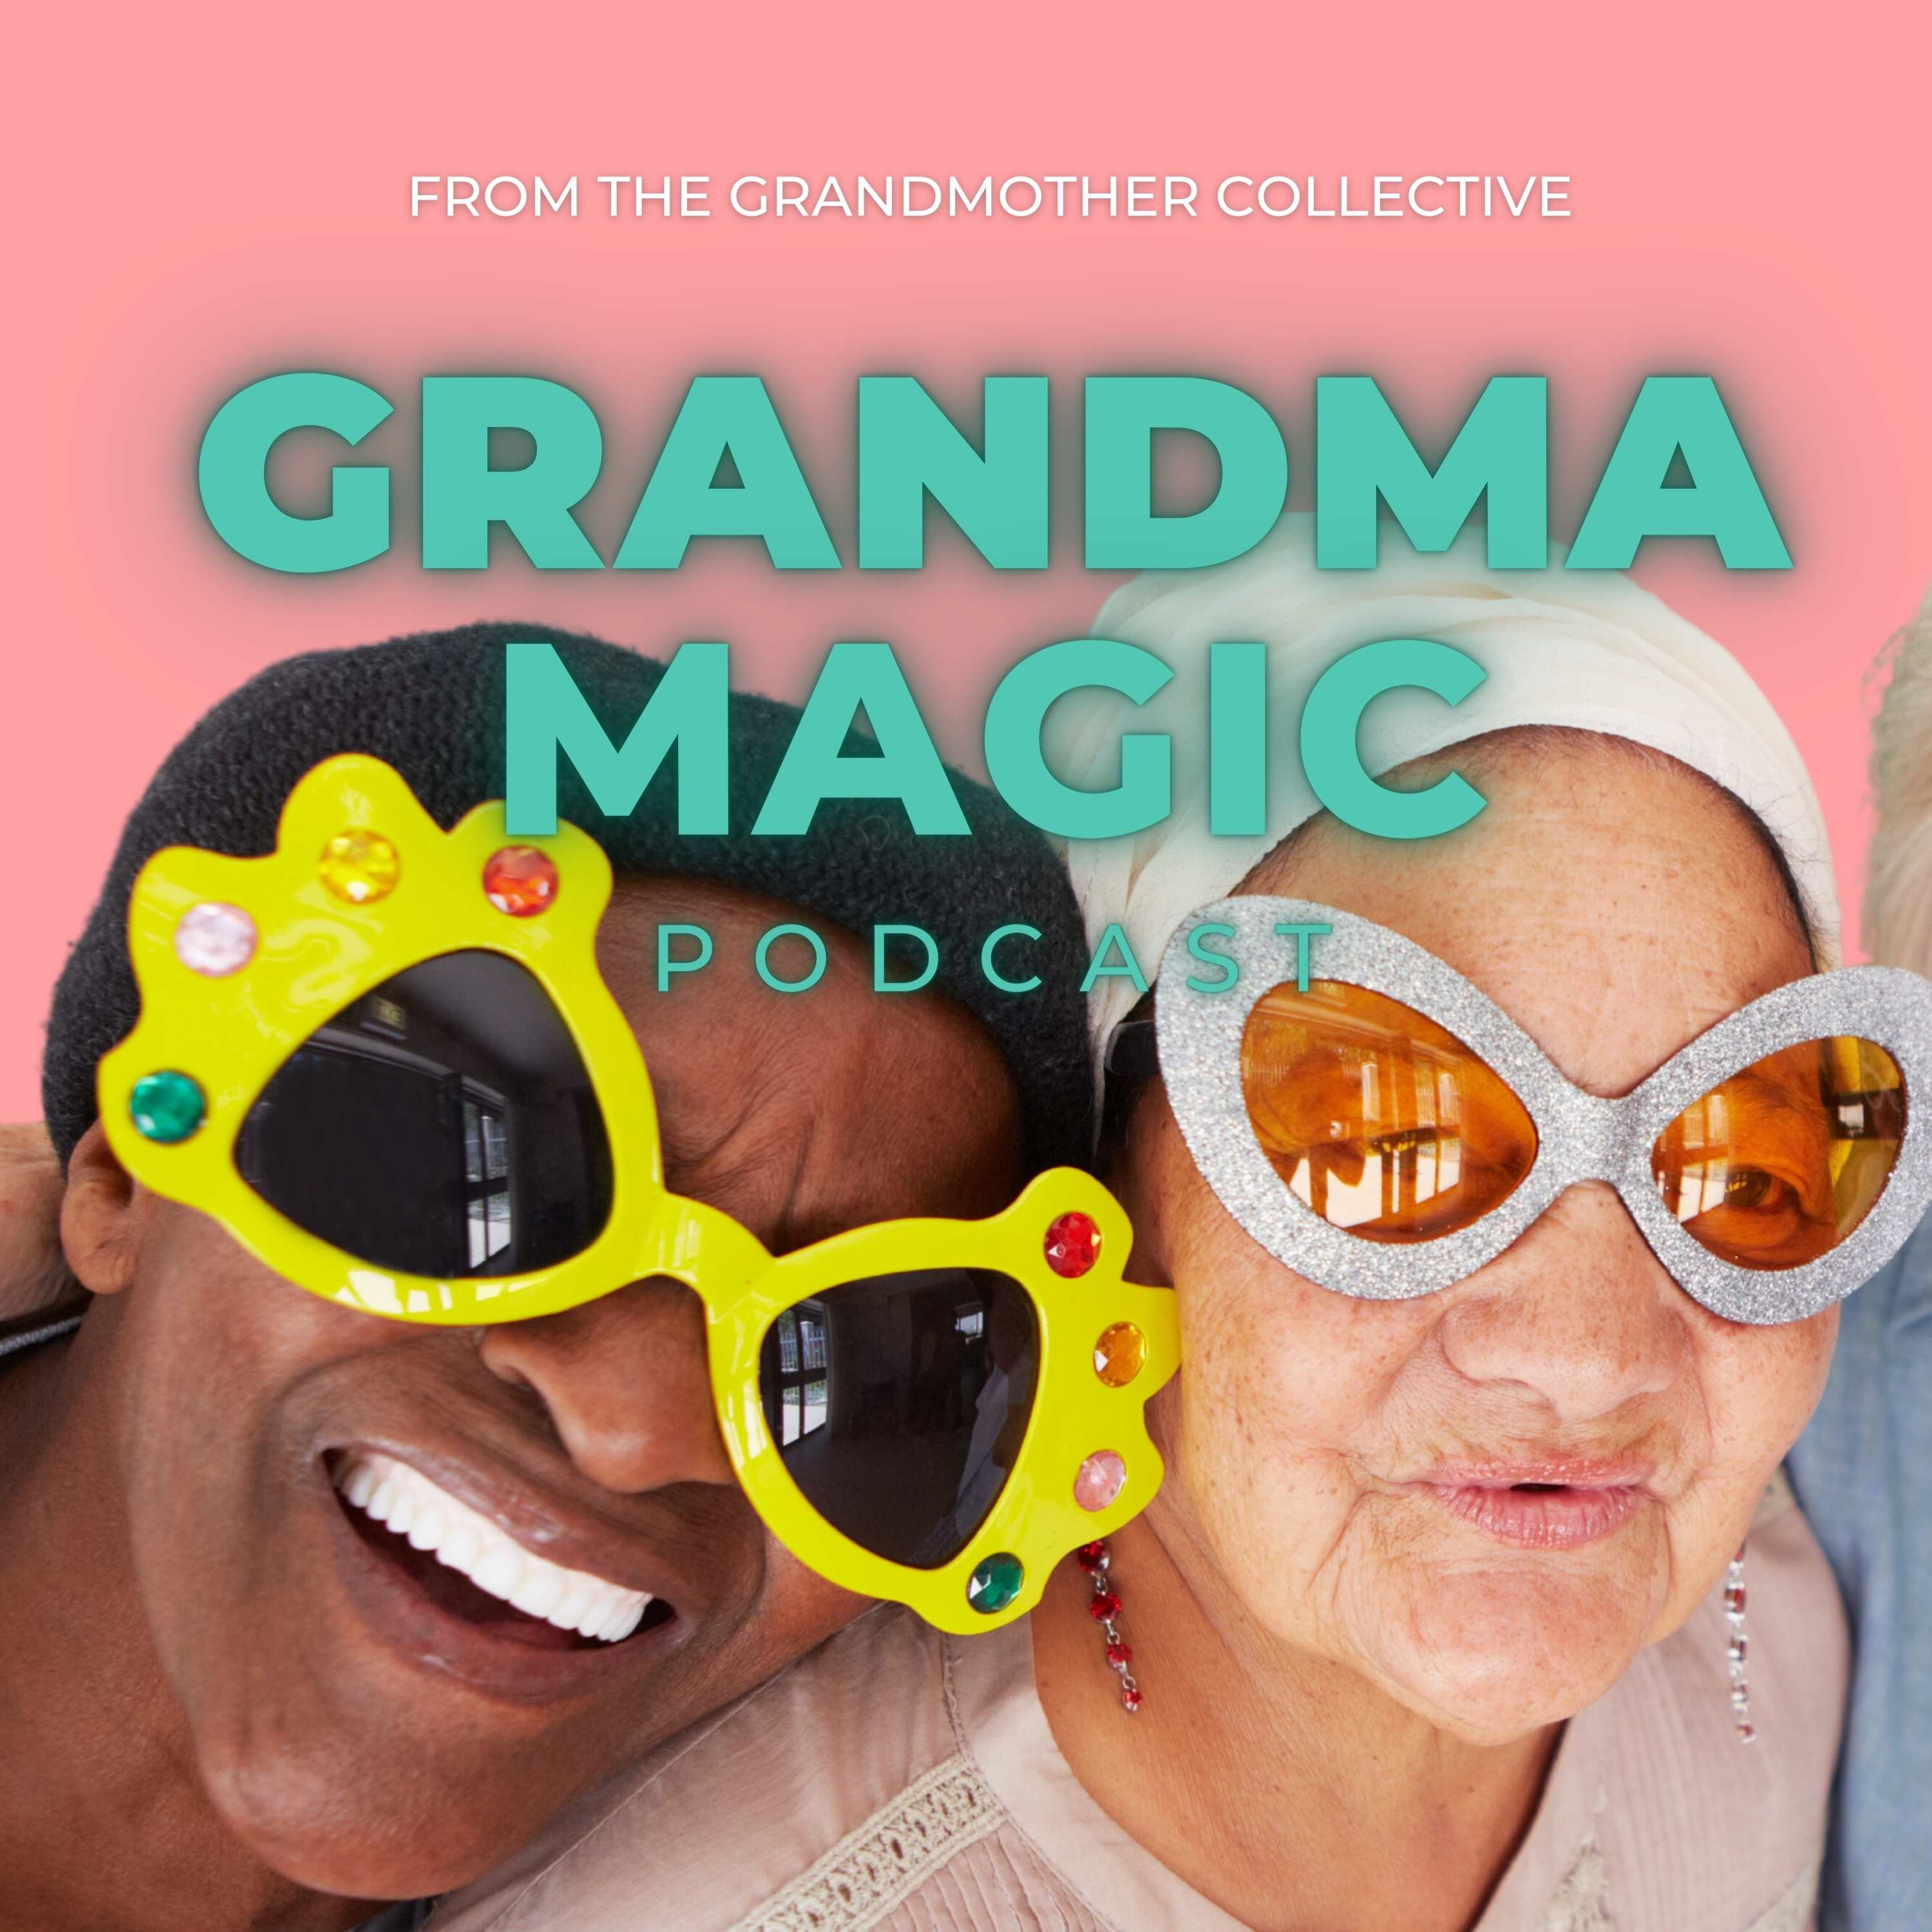 Grandma Magic: A podcast from the Grandmother Collective